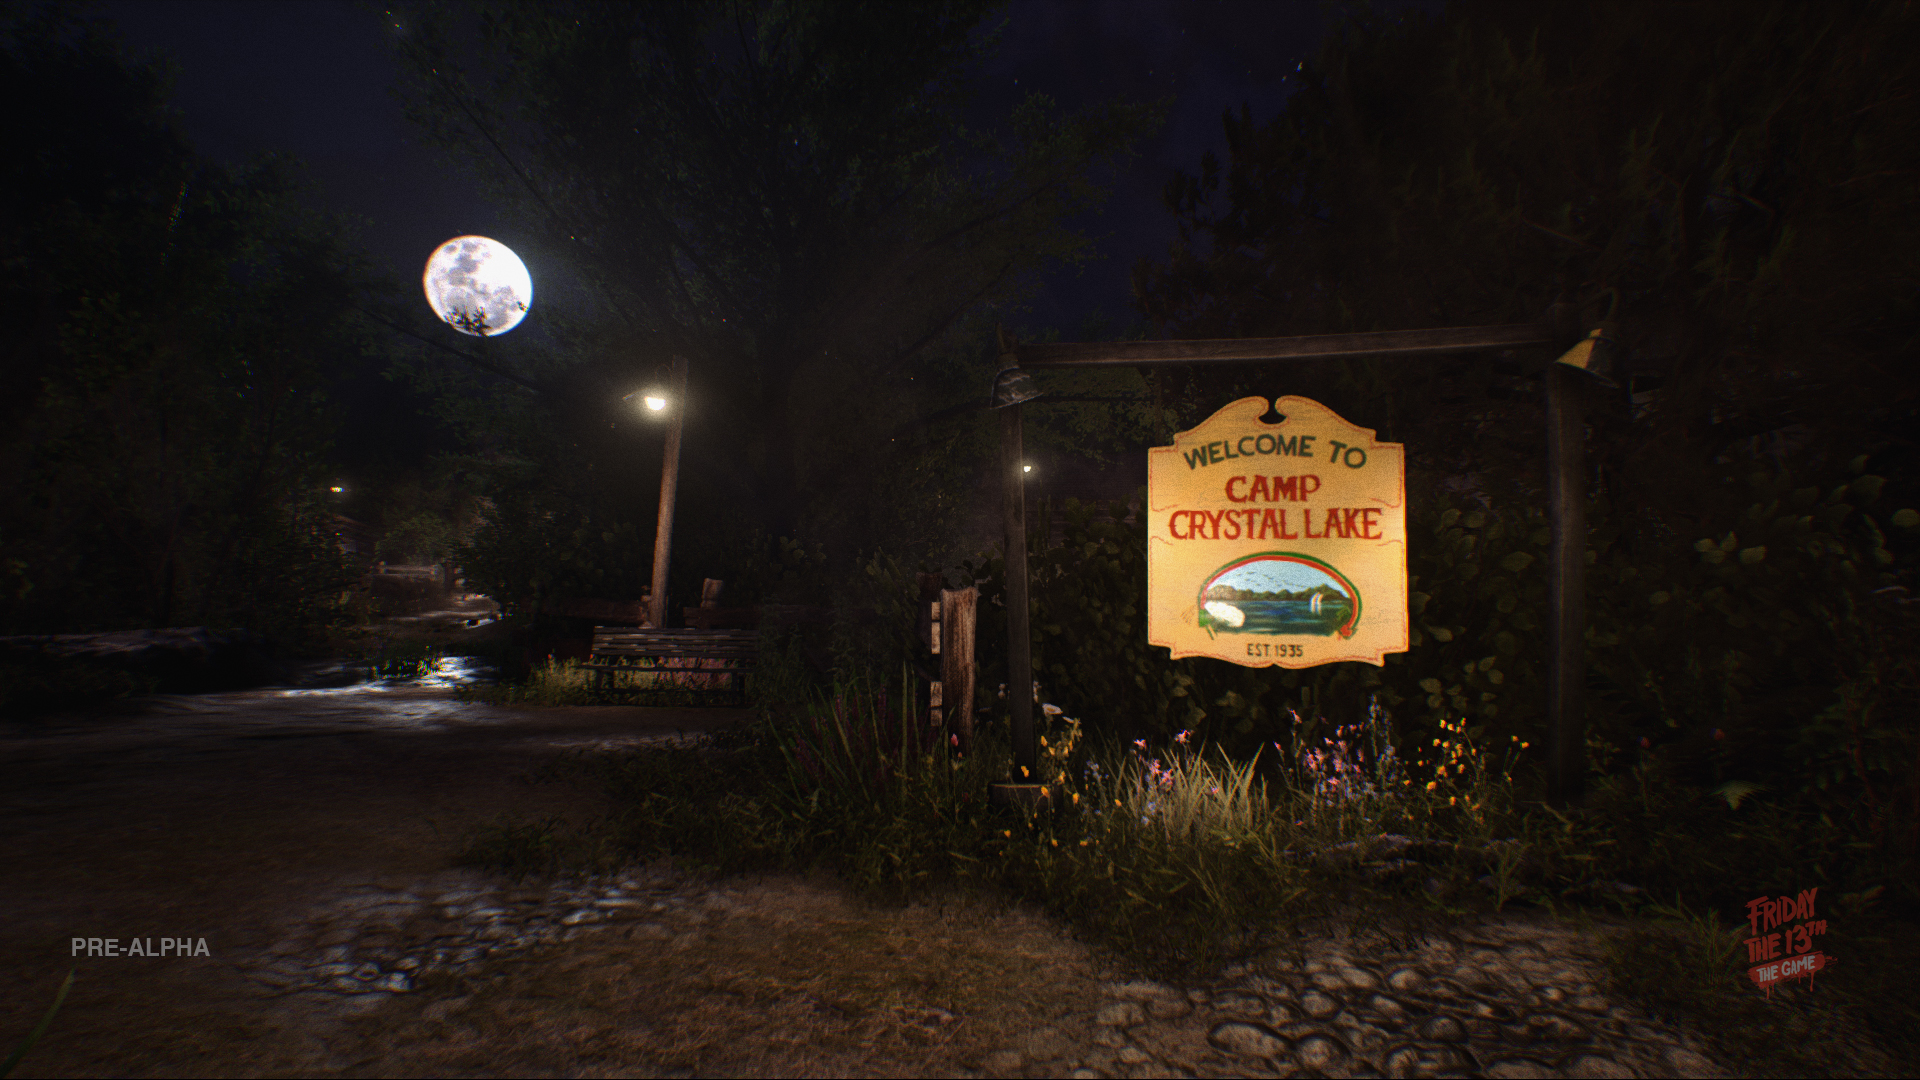 Friday The 13th: The Game #23